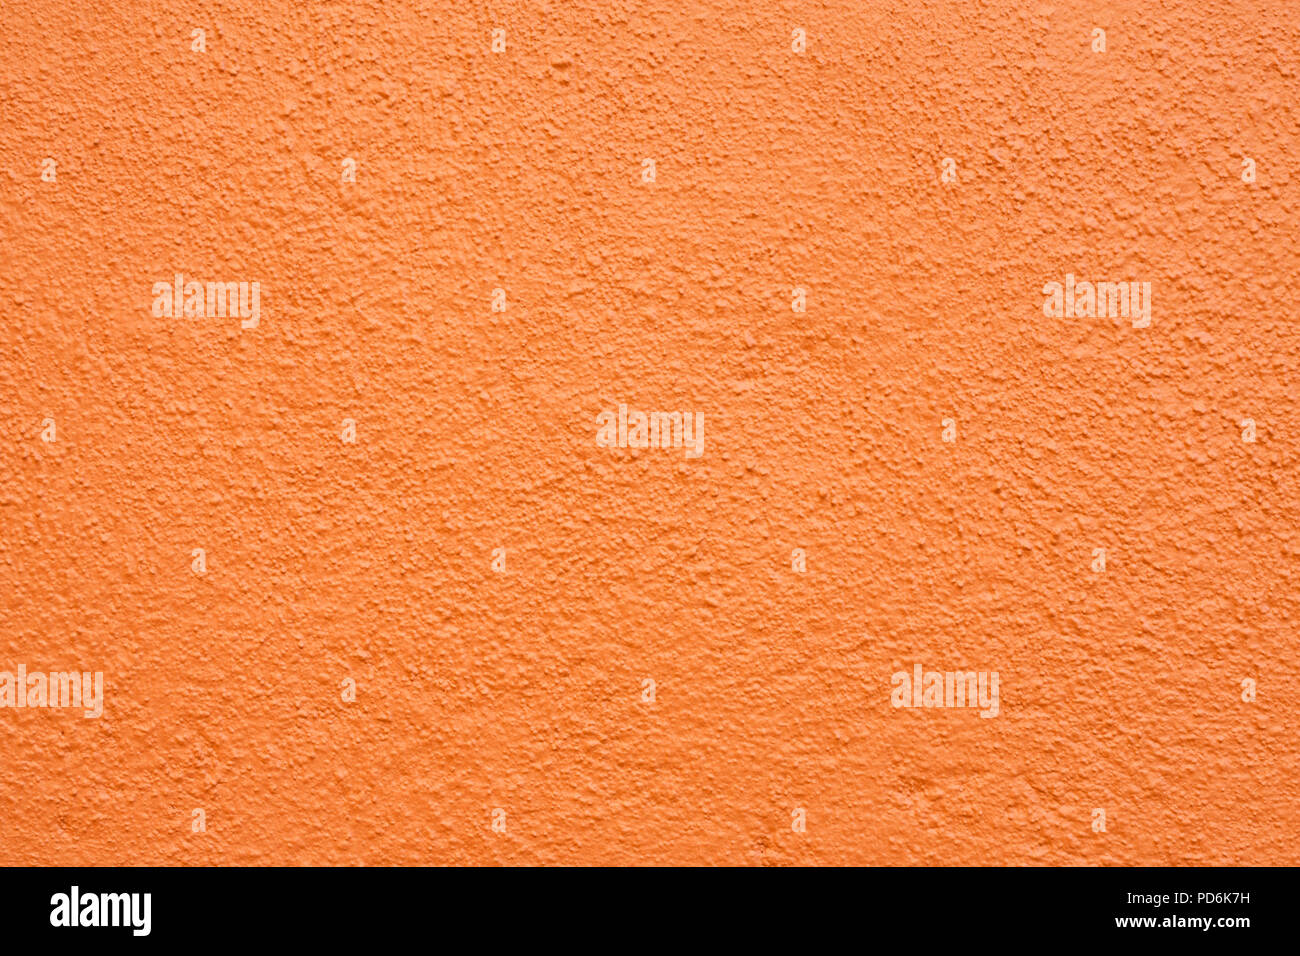 Stucco wall - Orange stucco textured wall background with natural light. Stock Photo